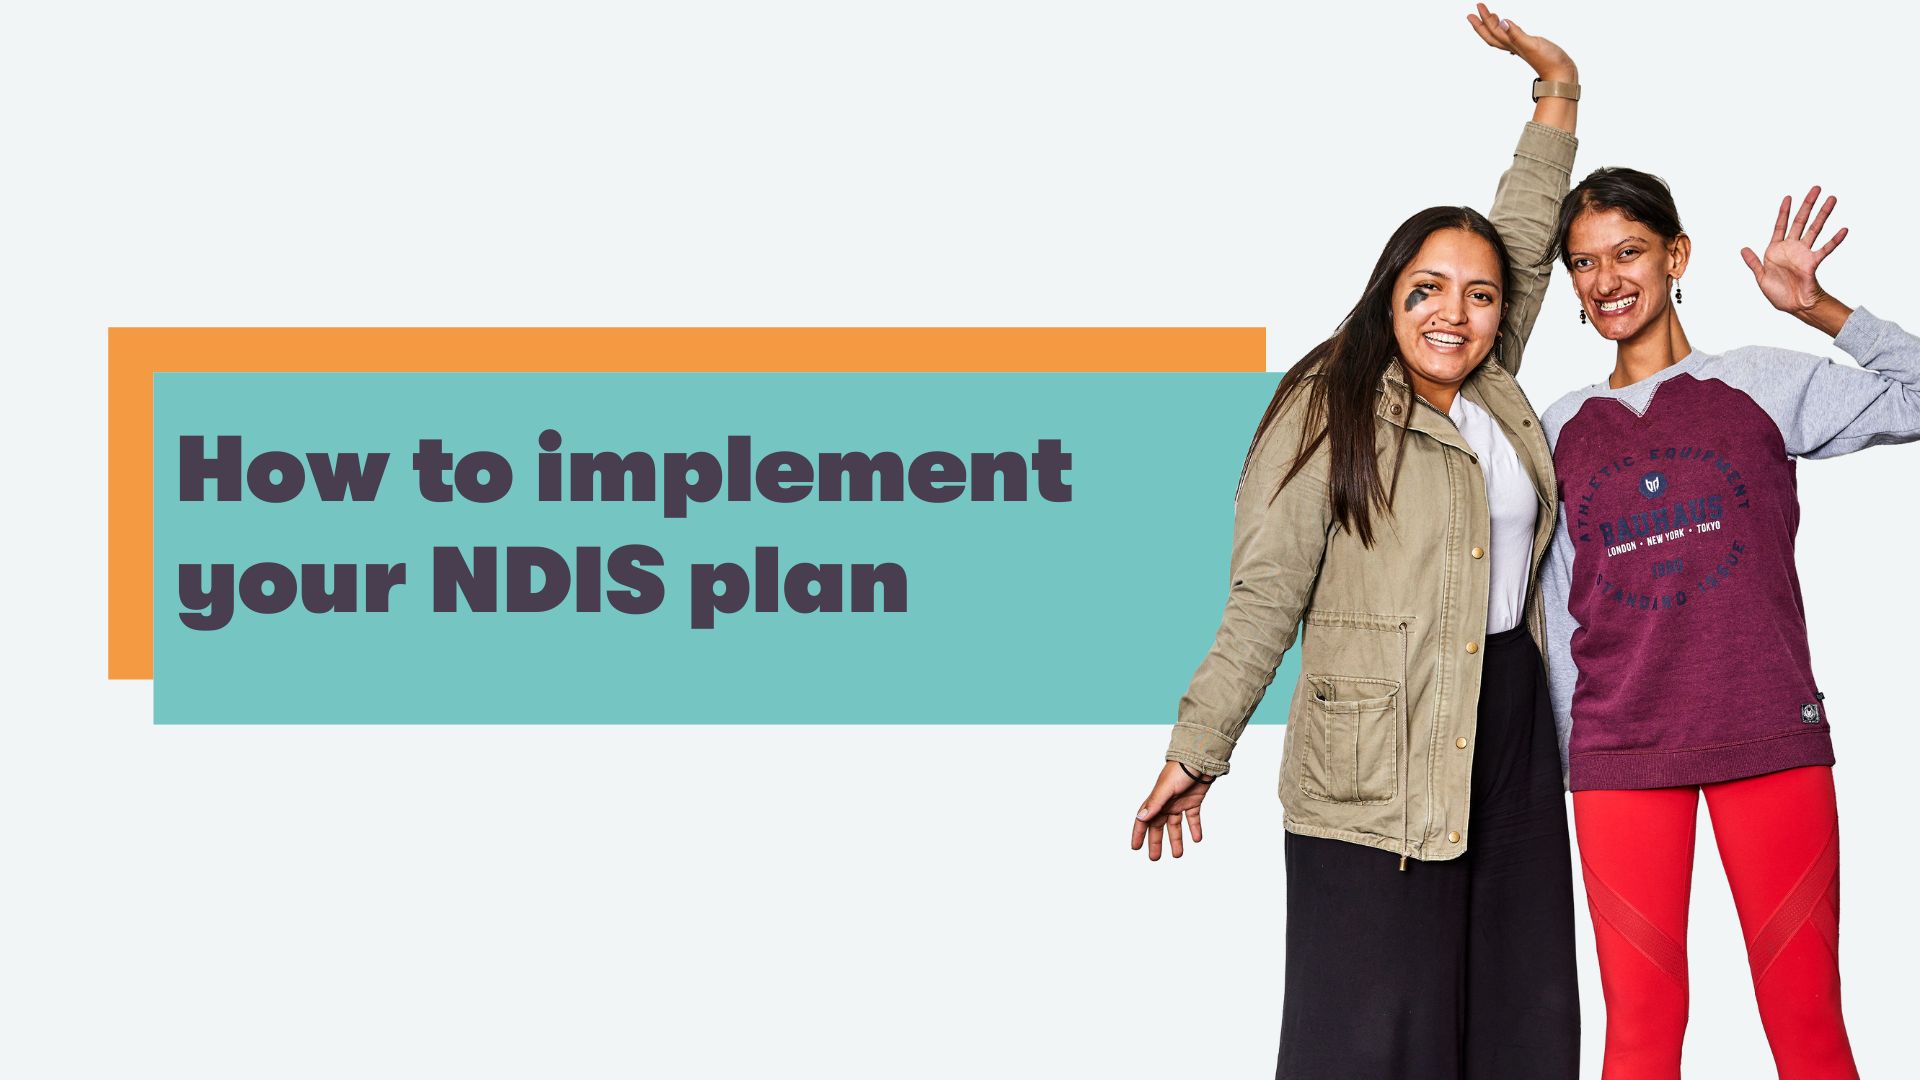 Text: Understanding how NDIS funding decisions are made. A photo of a man in a wheelchair smiles next to text